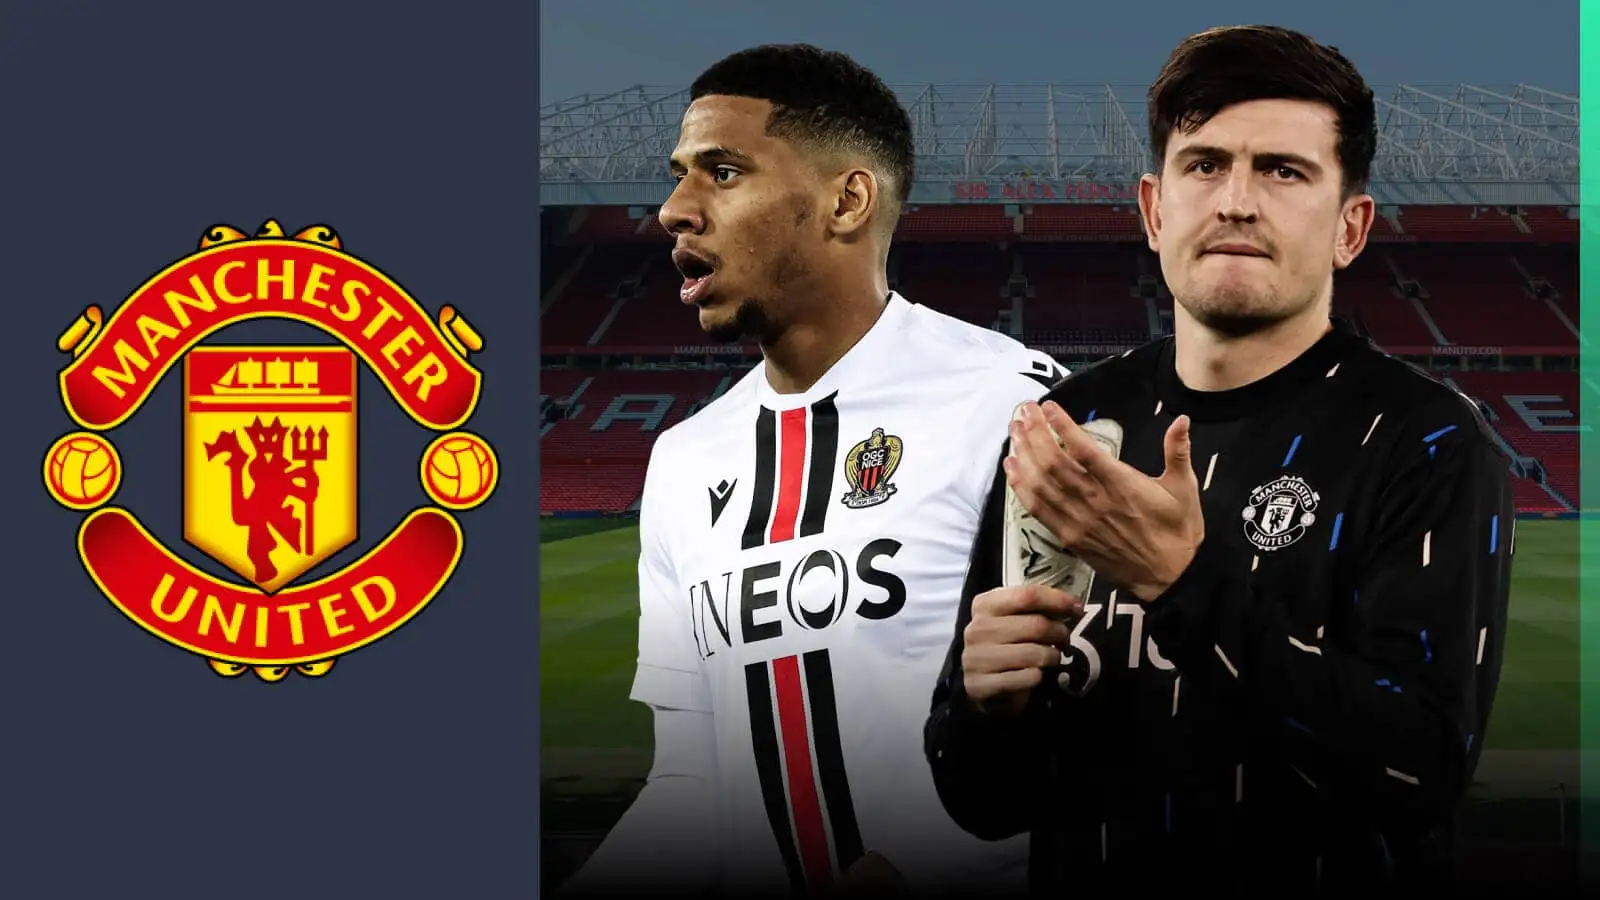 Euro Paper Talk: Man Utd ‘activate’ next signing by pumping Maguire funds straight into deal for replacement; Chelsea striker target’s demands revealed